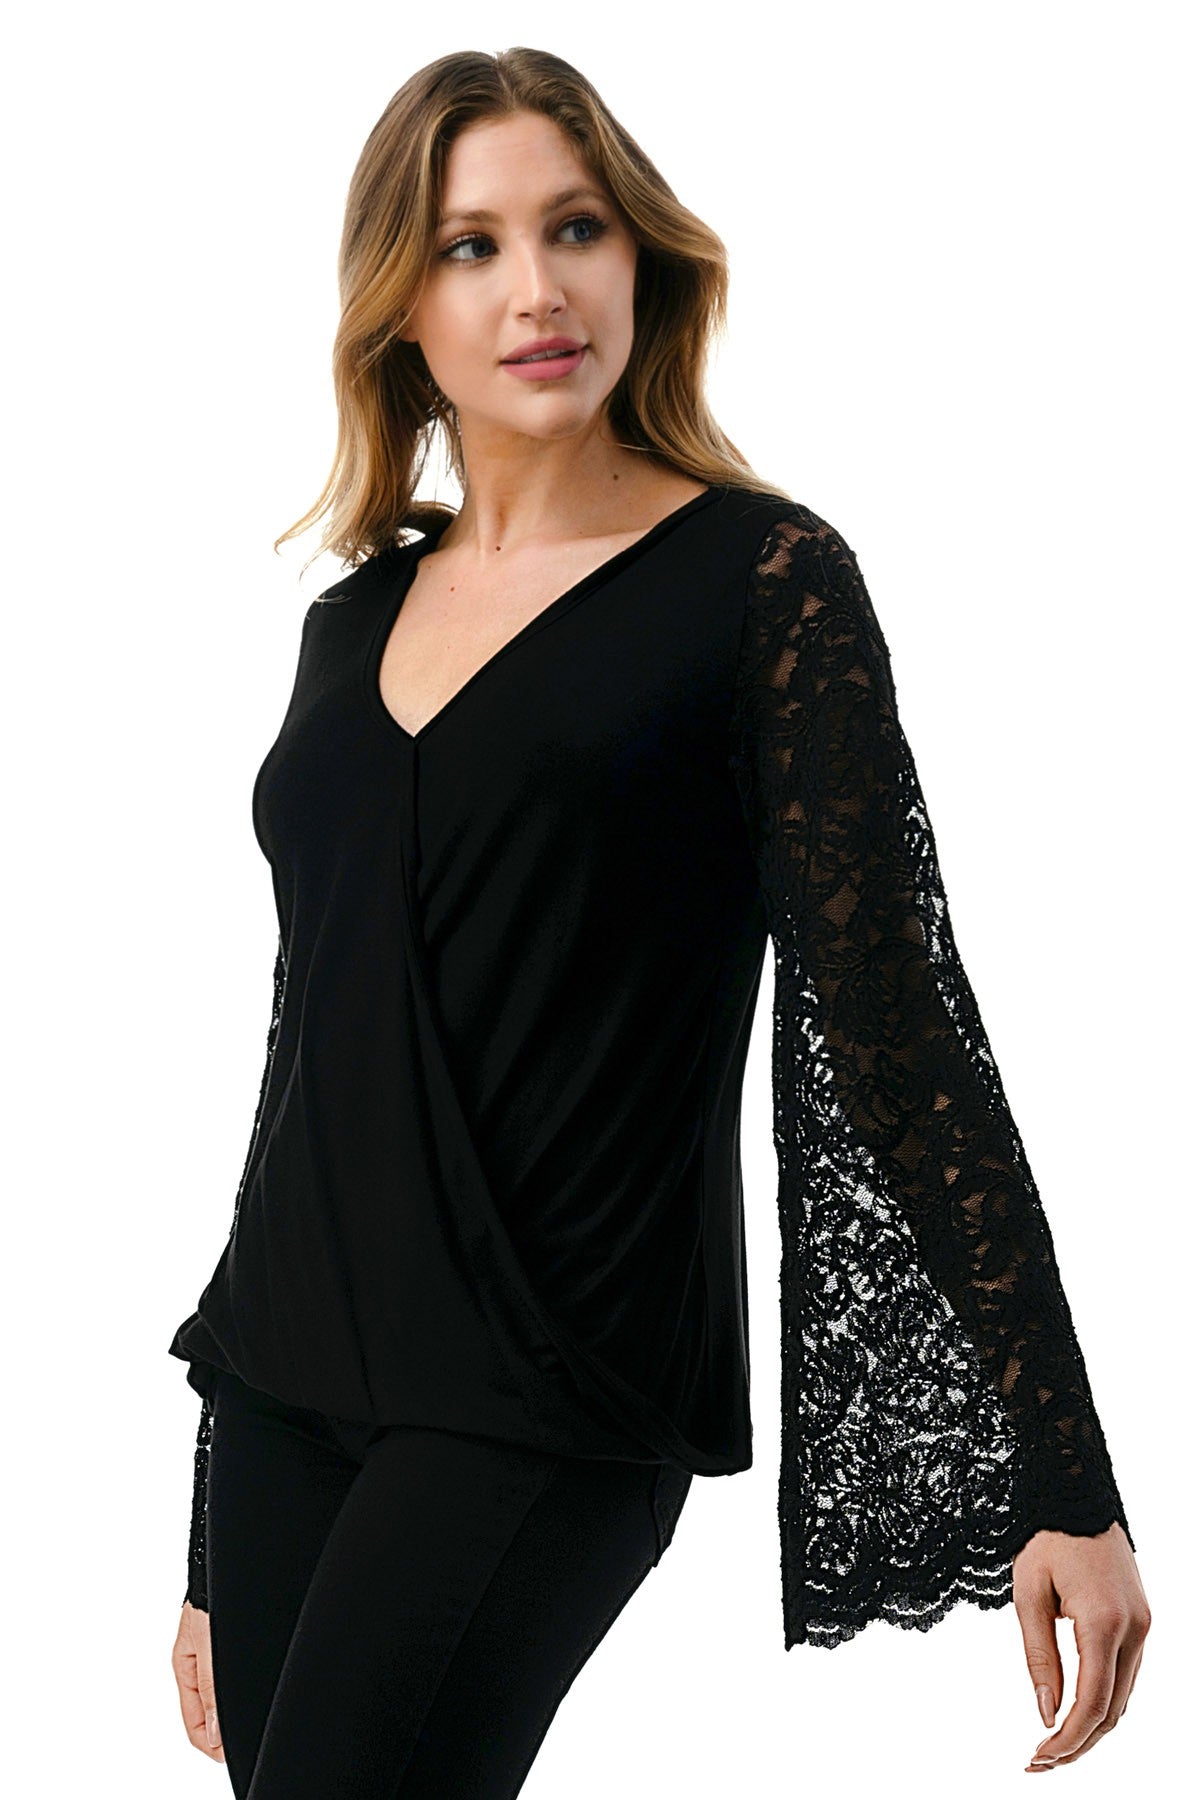 Black Surplice Top With Lace Sleeves